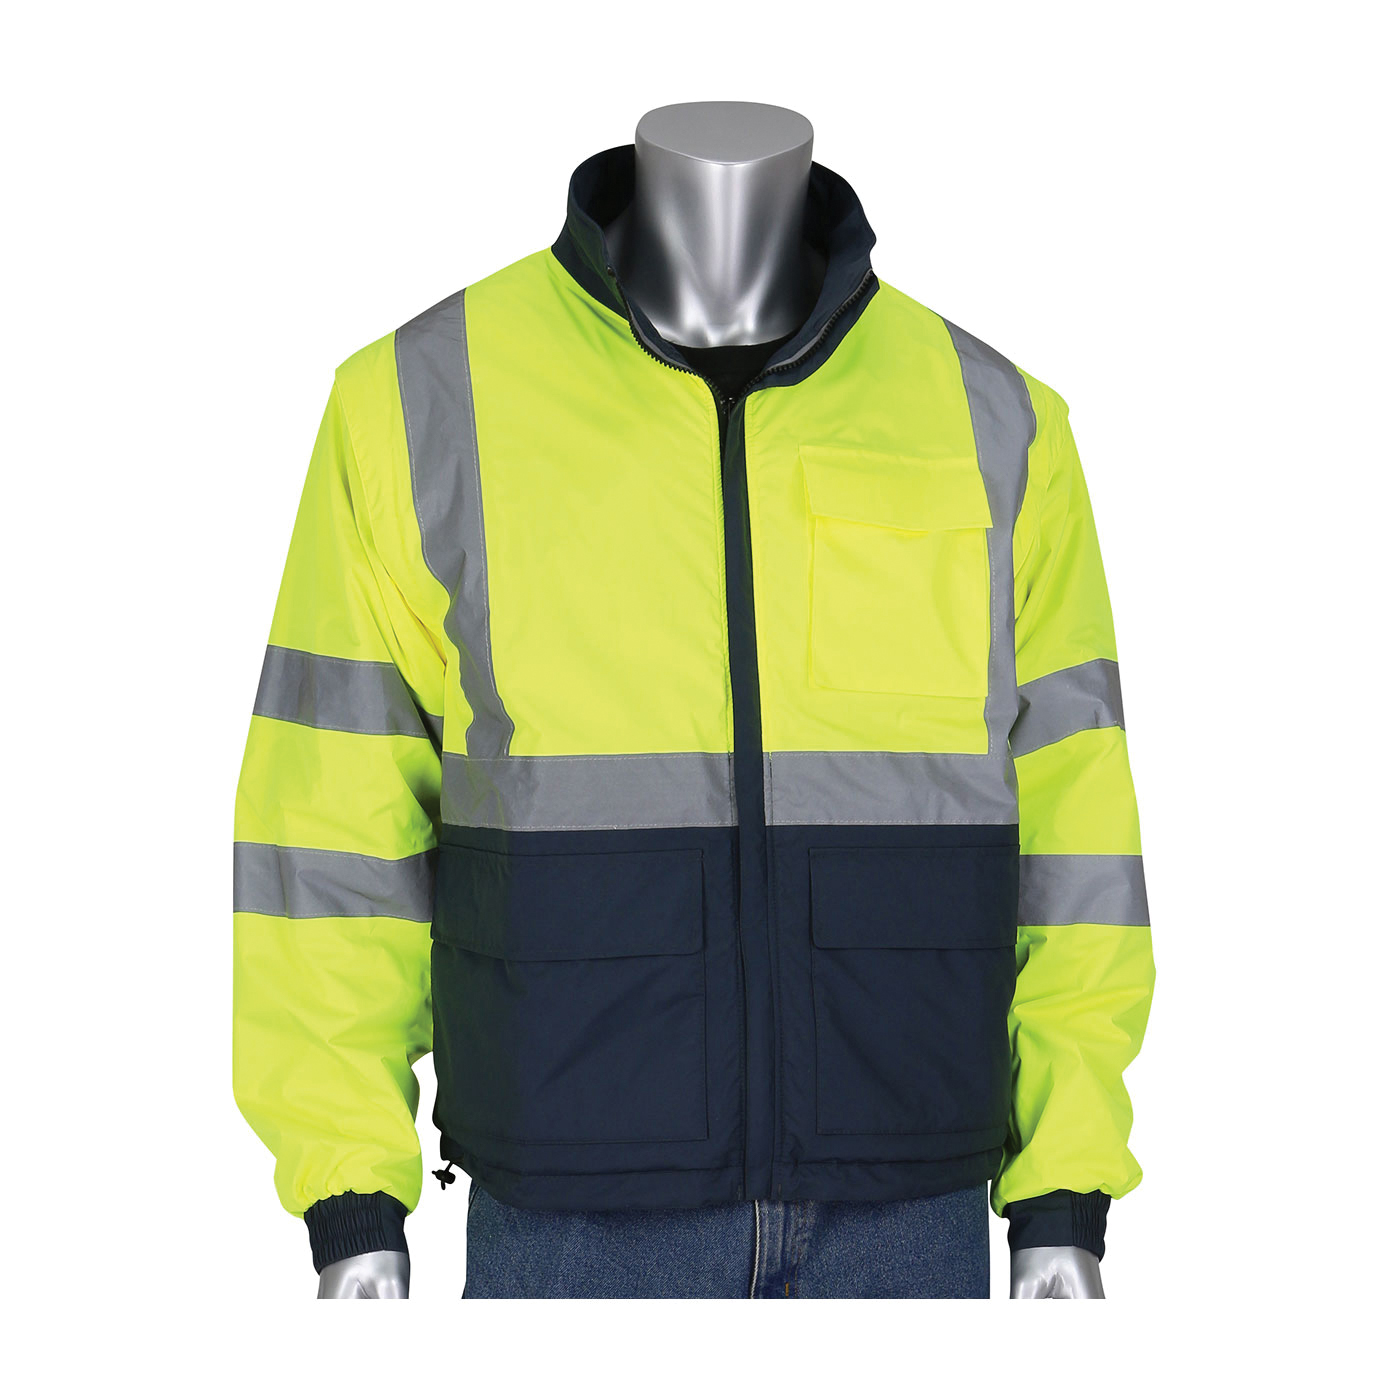 PIP® 333-1500-R/M 333-1500-R 4-in-1 Multi-Seasonal Lightweight Reversible Windbreaker Jacket With Detachable Sleeves, Dark Gray/Hi-Viz Lime Yellow, Polyester, 48.8 in Chest, Resists: Water, ANSI 107 Type R Class 3